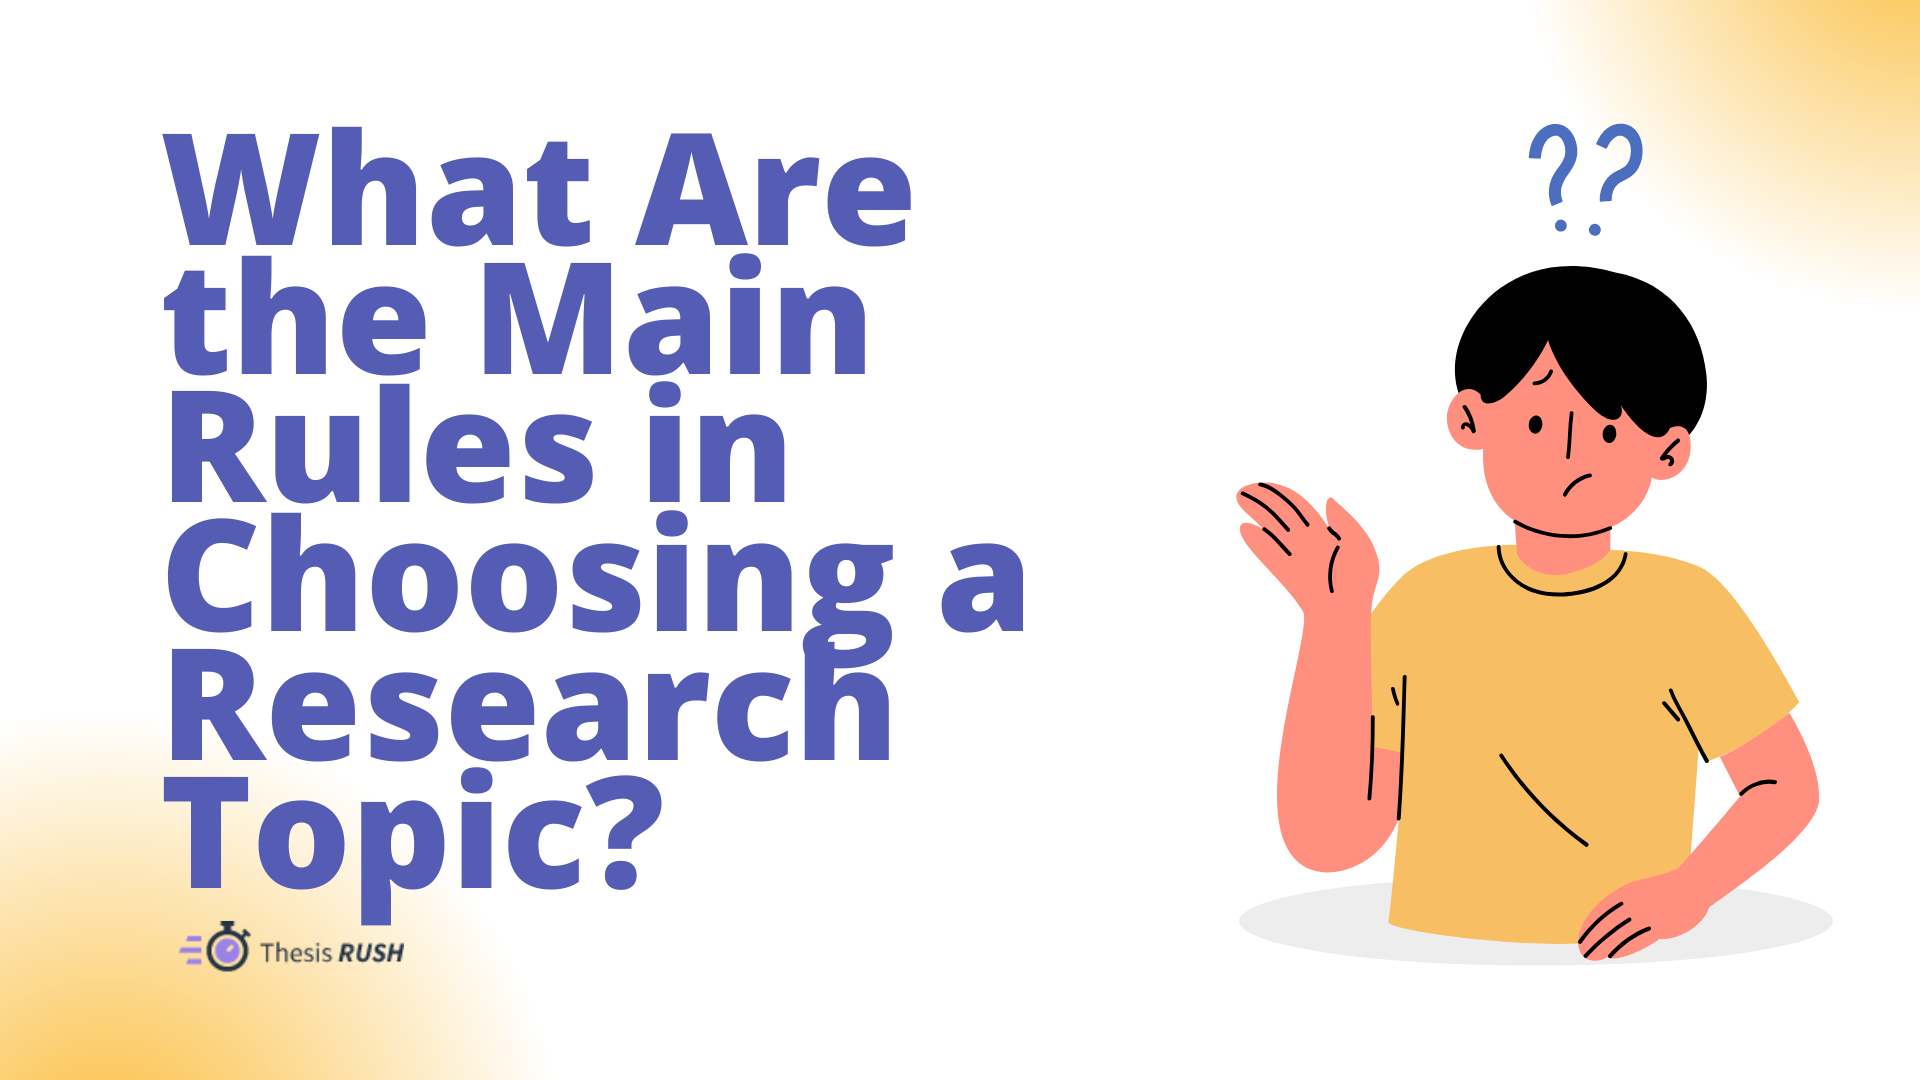 What Are the Rules in Choosing a Research Topic